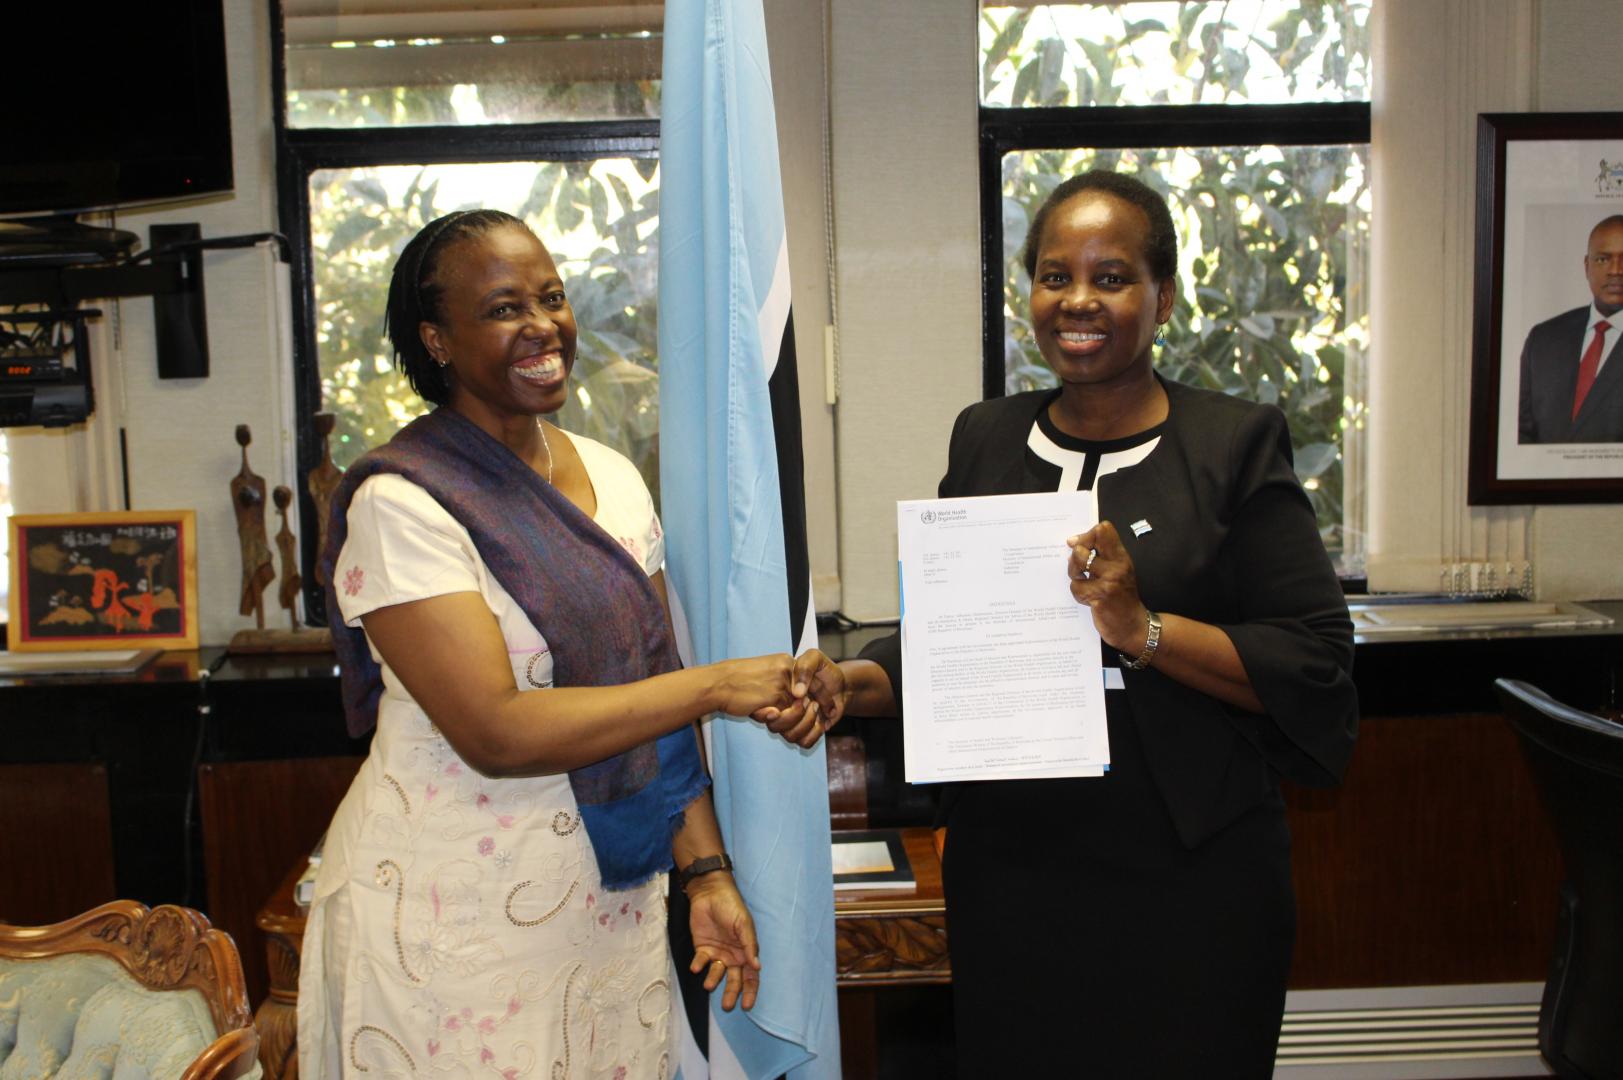 The Honourable Minister of International Affairs and Cooperation, Dr Unity Dow (right), receiving the credentials of the WHO Representative to Botswana, Dr Josephine Namboze (left)